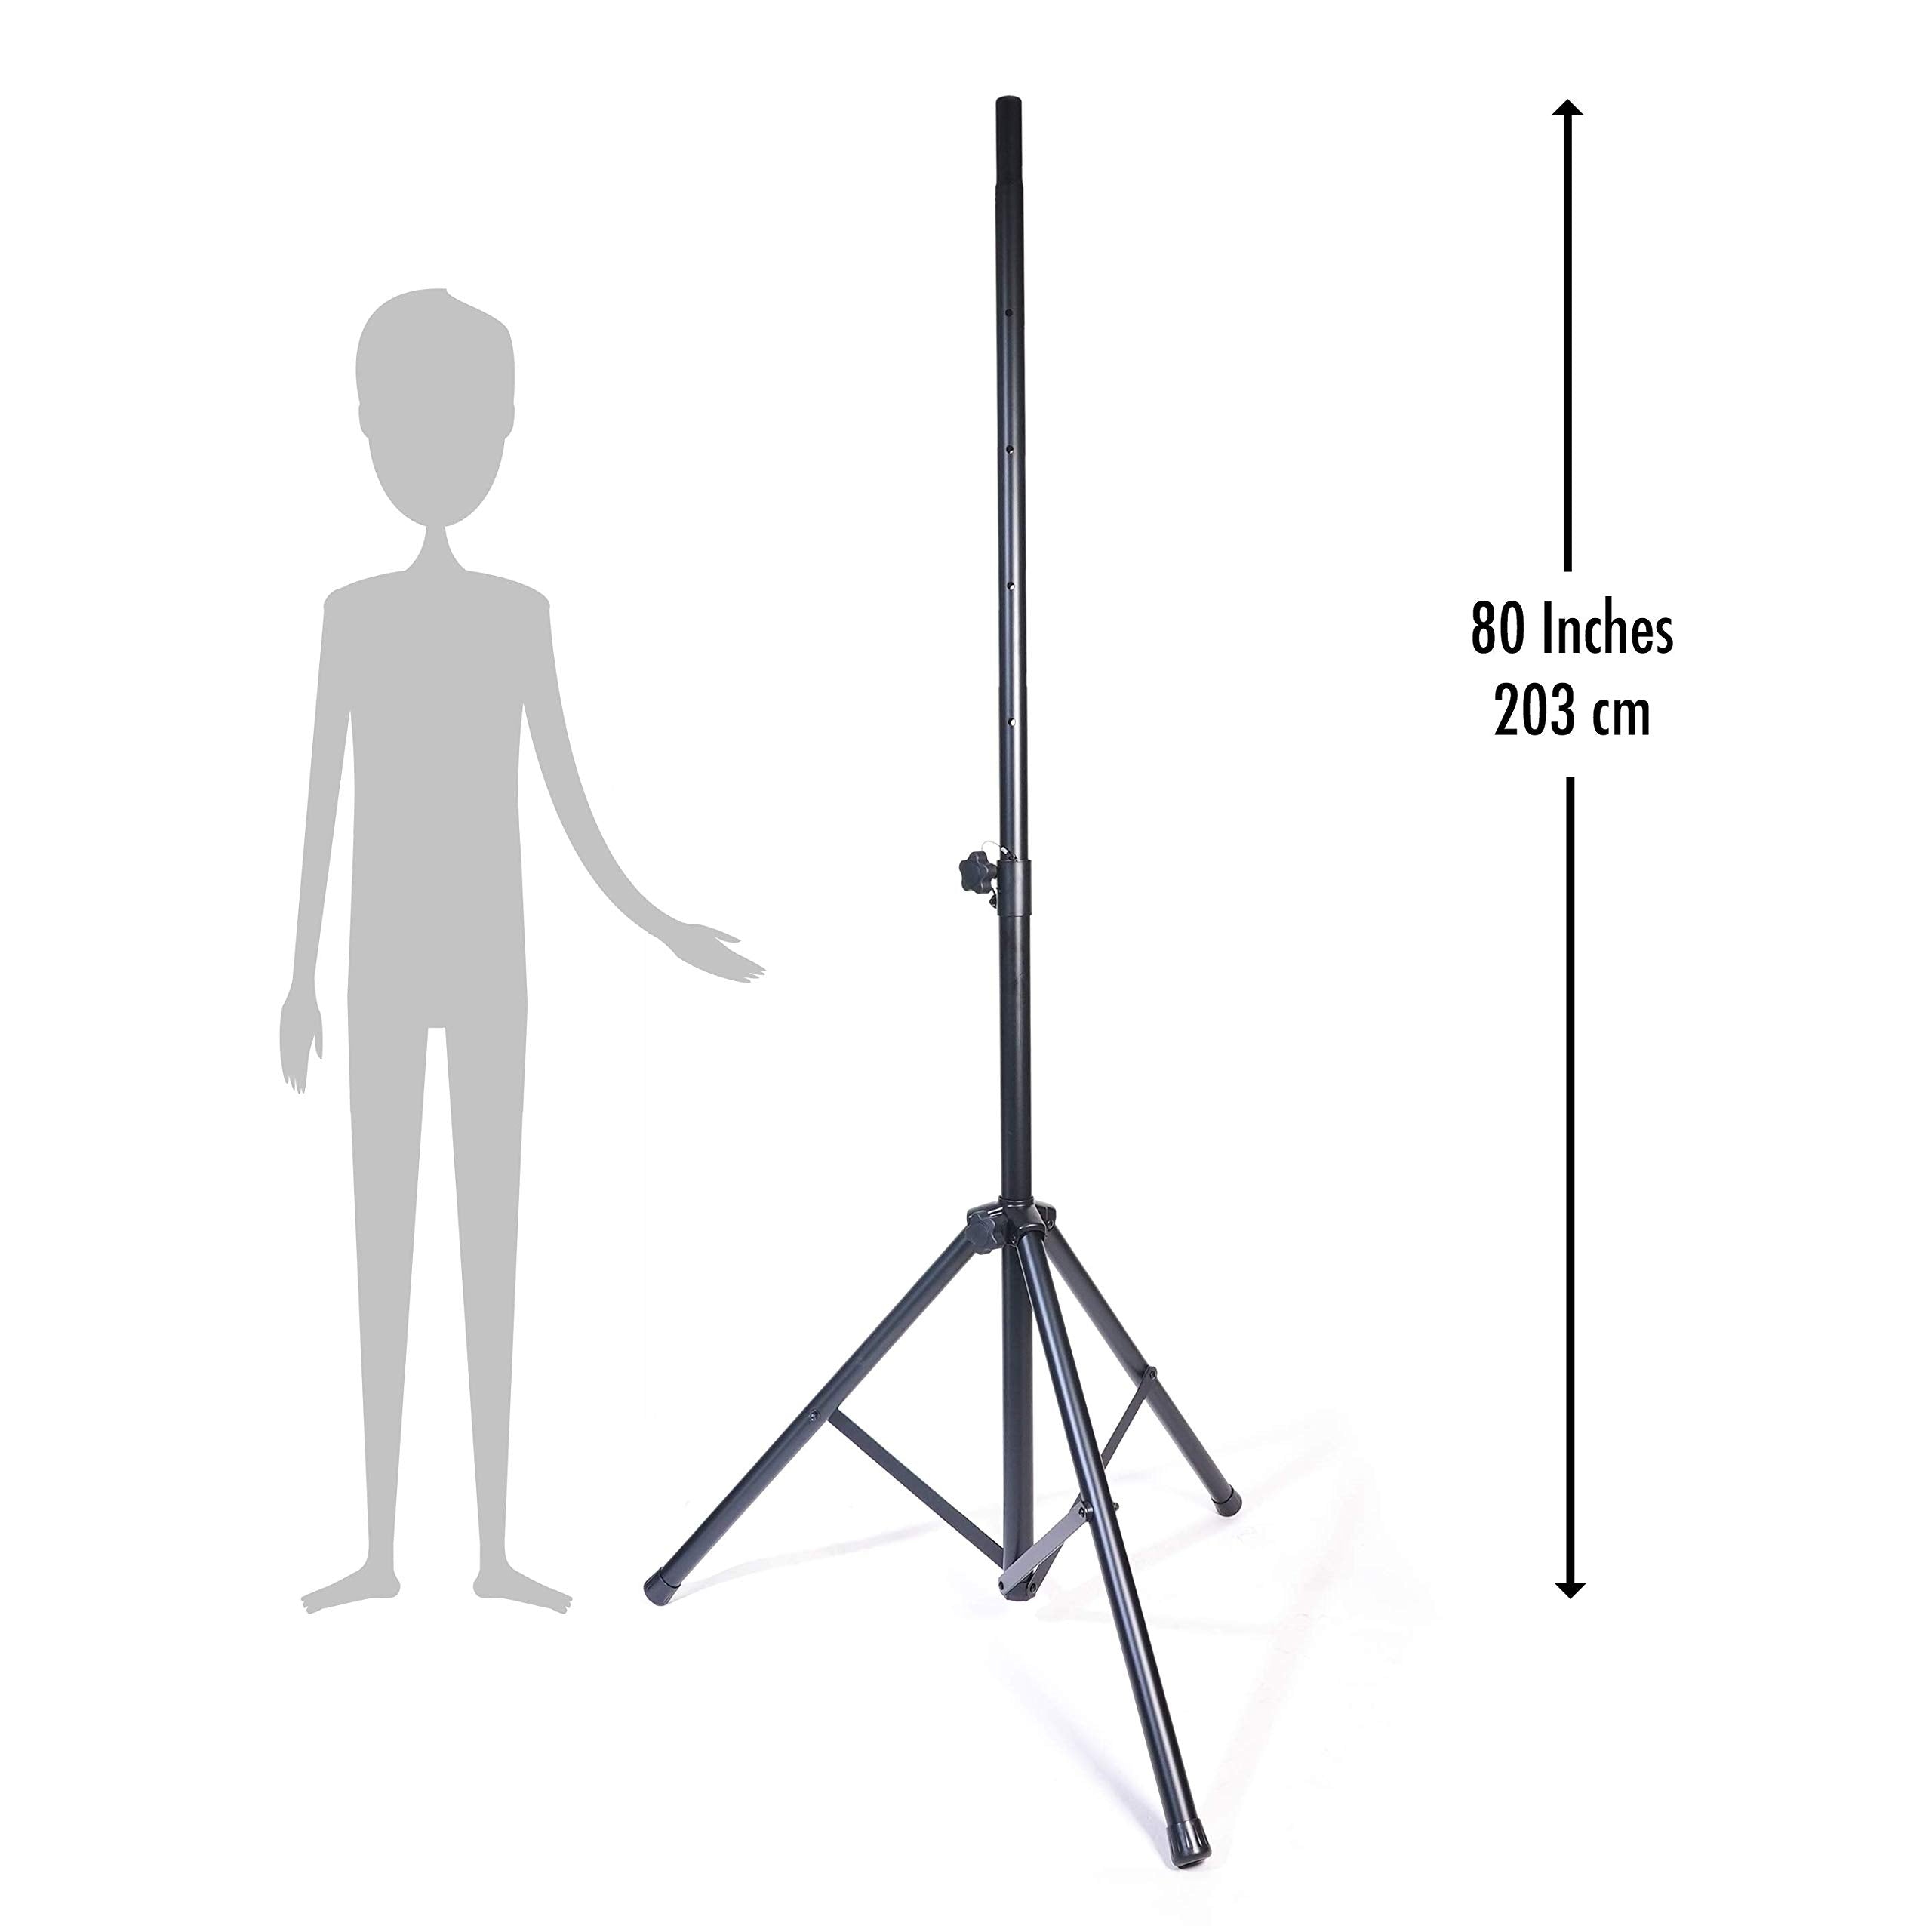 4 PACK of Universal Speaker Stands 6.65 ft • Adjustable Height from 46 in to 80 in • Rated at 150 pounds